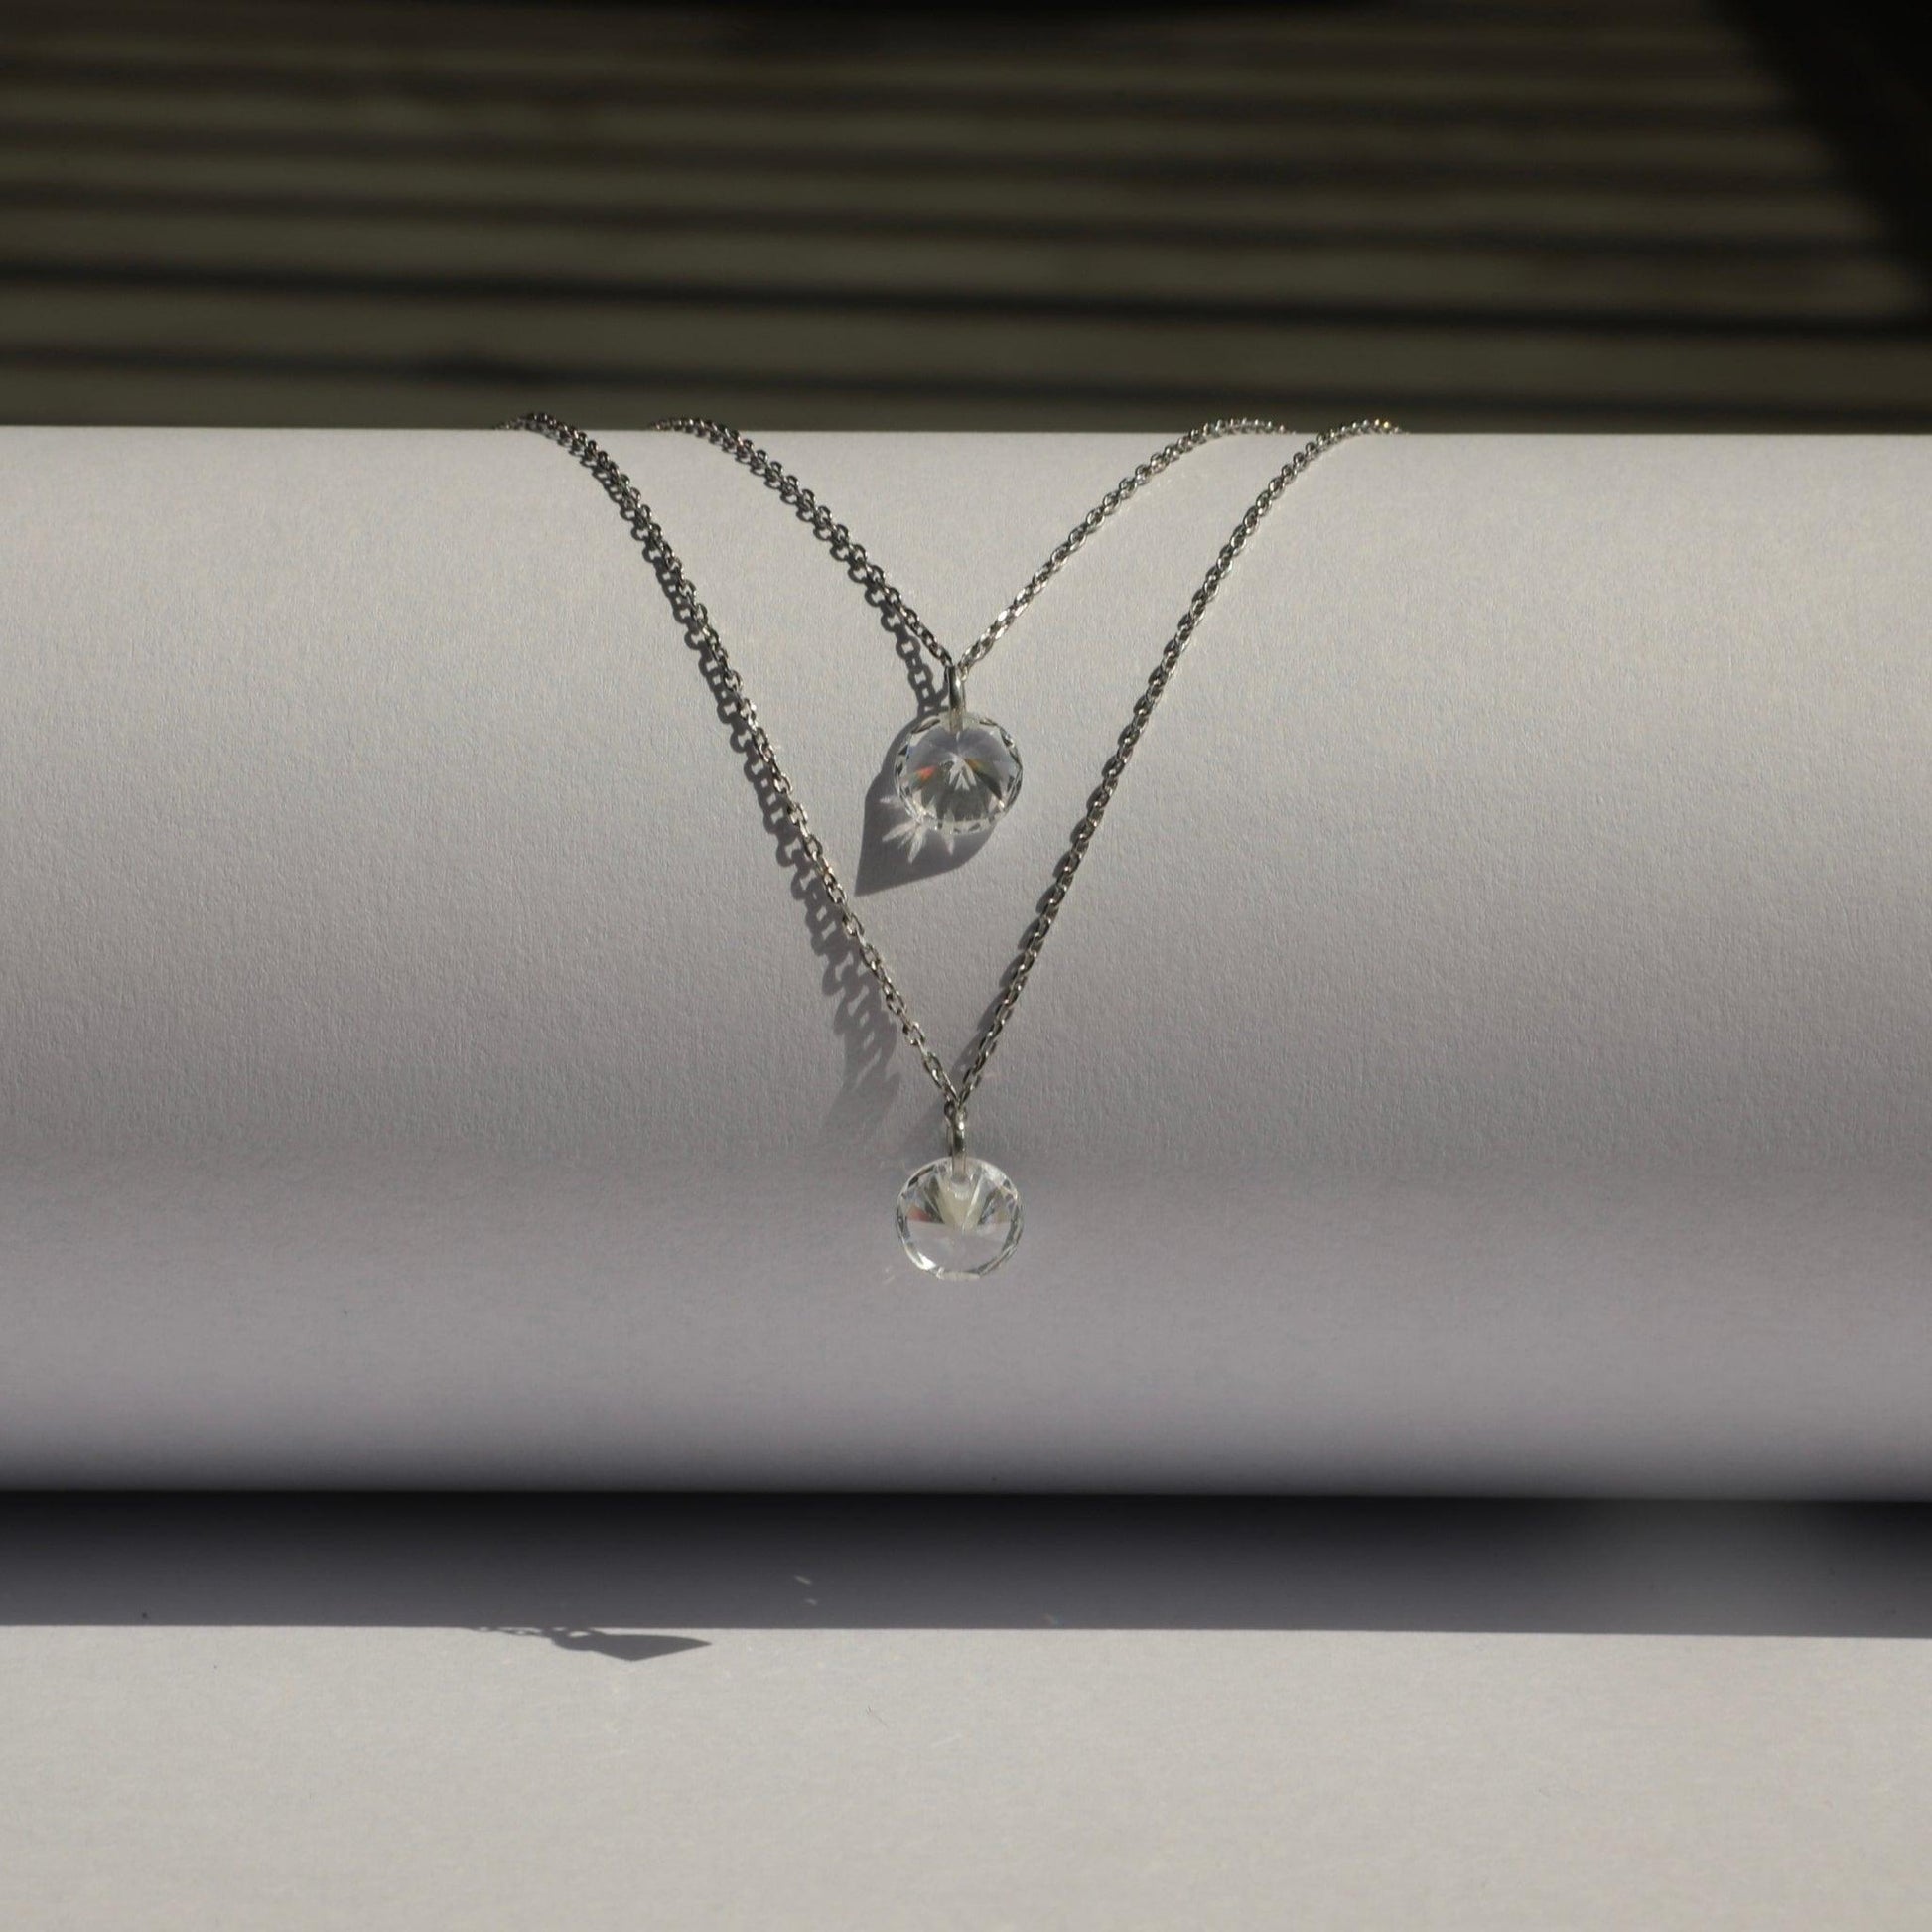 Elegant sterling silver necklace adorned with sparkling AAA cubic zirconia for a touch of timeless glamour